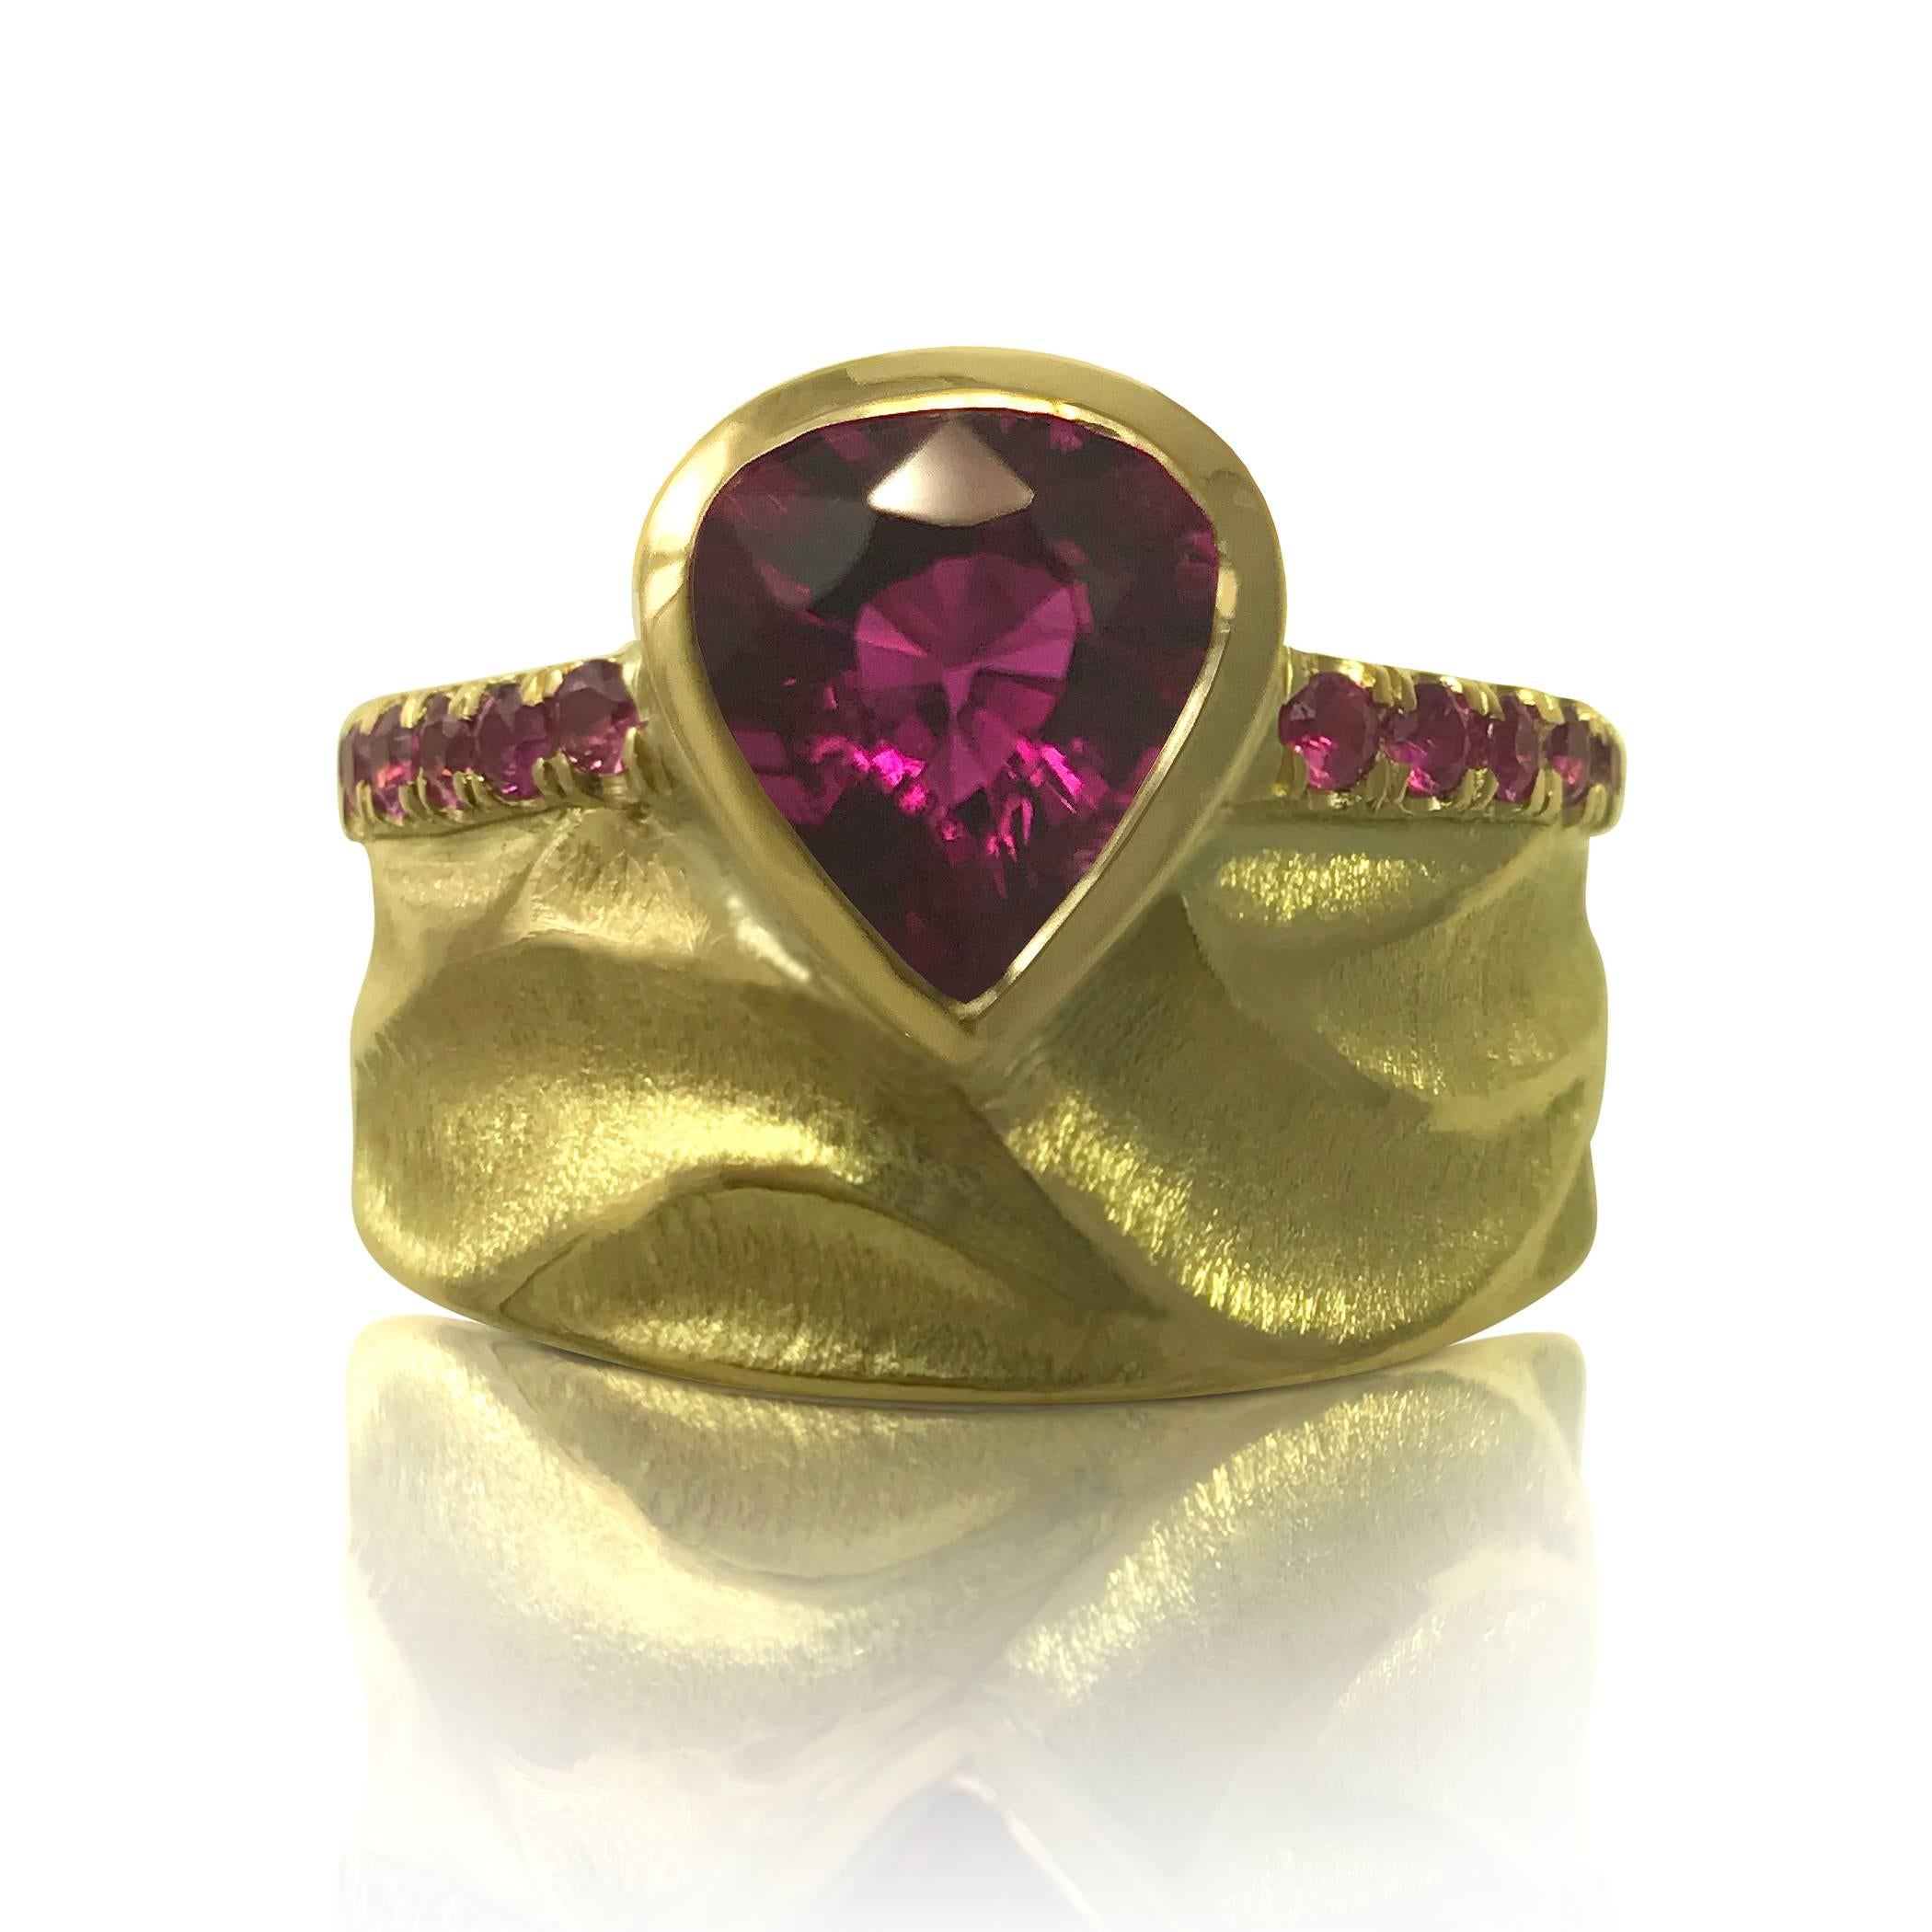 The Royal Crown Ring, which features my signature “dune” texture, is 15mm wide and is made from 18k yellow gold. A spectacular 1.2ct rhodolite garnet is the focal point. Around the edges are 0.27ct of pink sapphires that gradually become lighter as